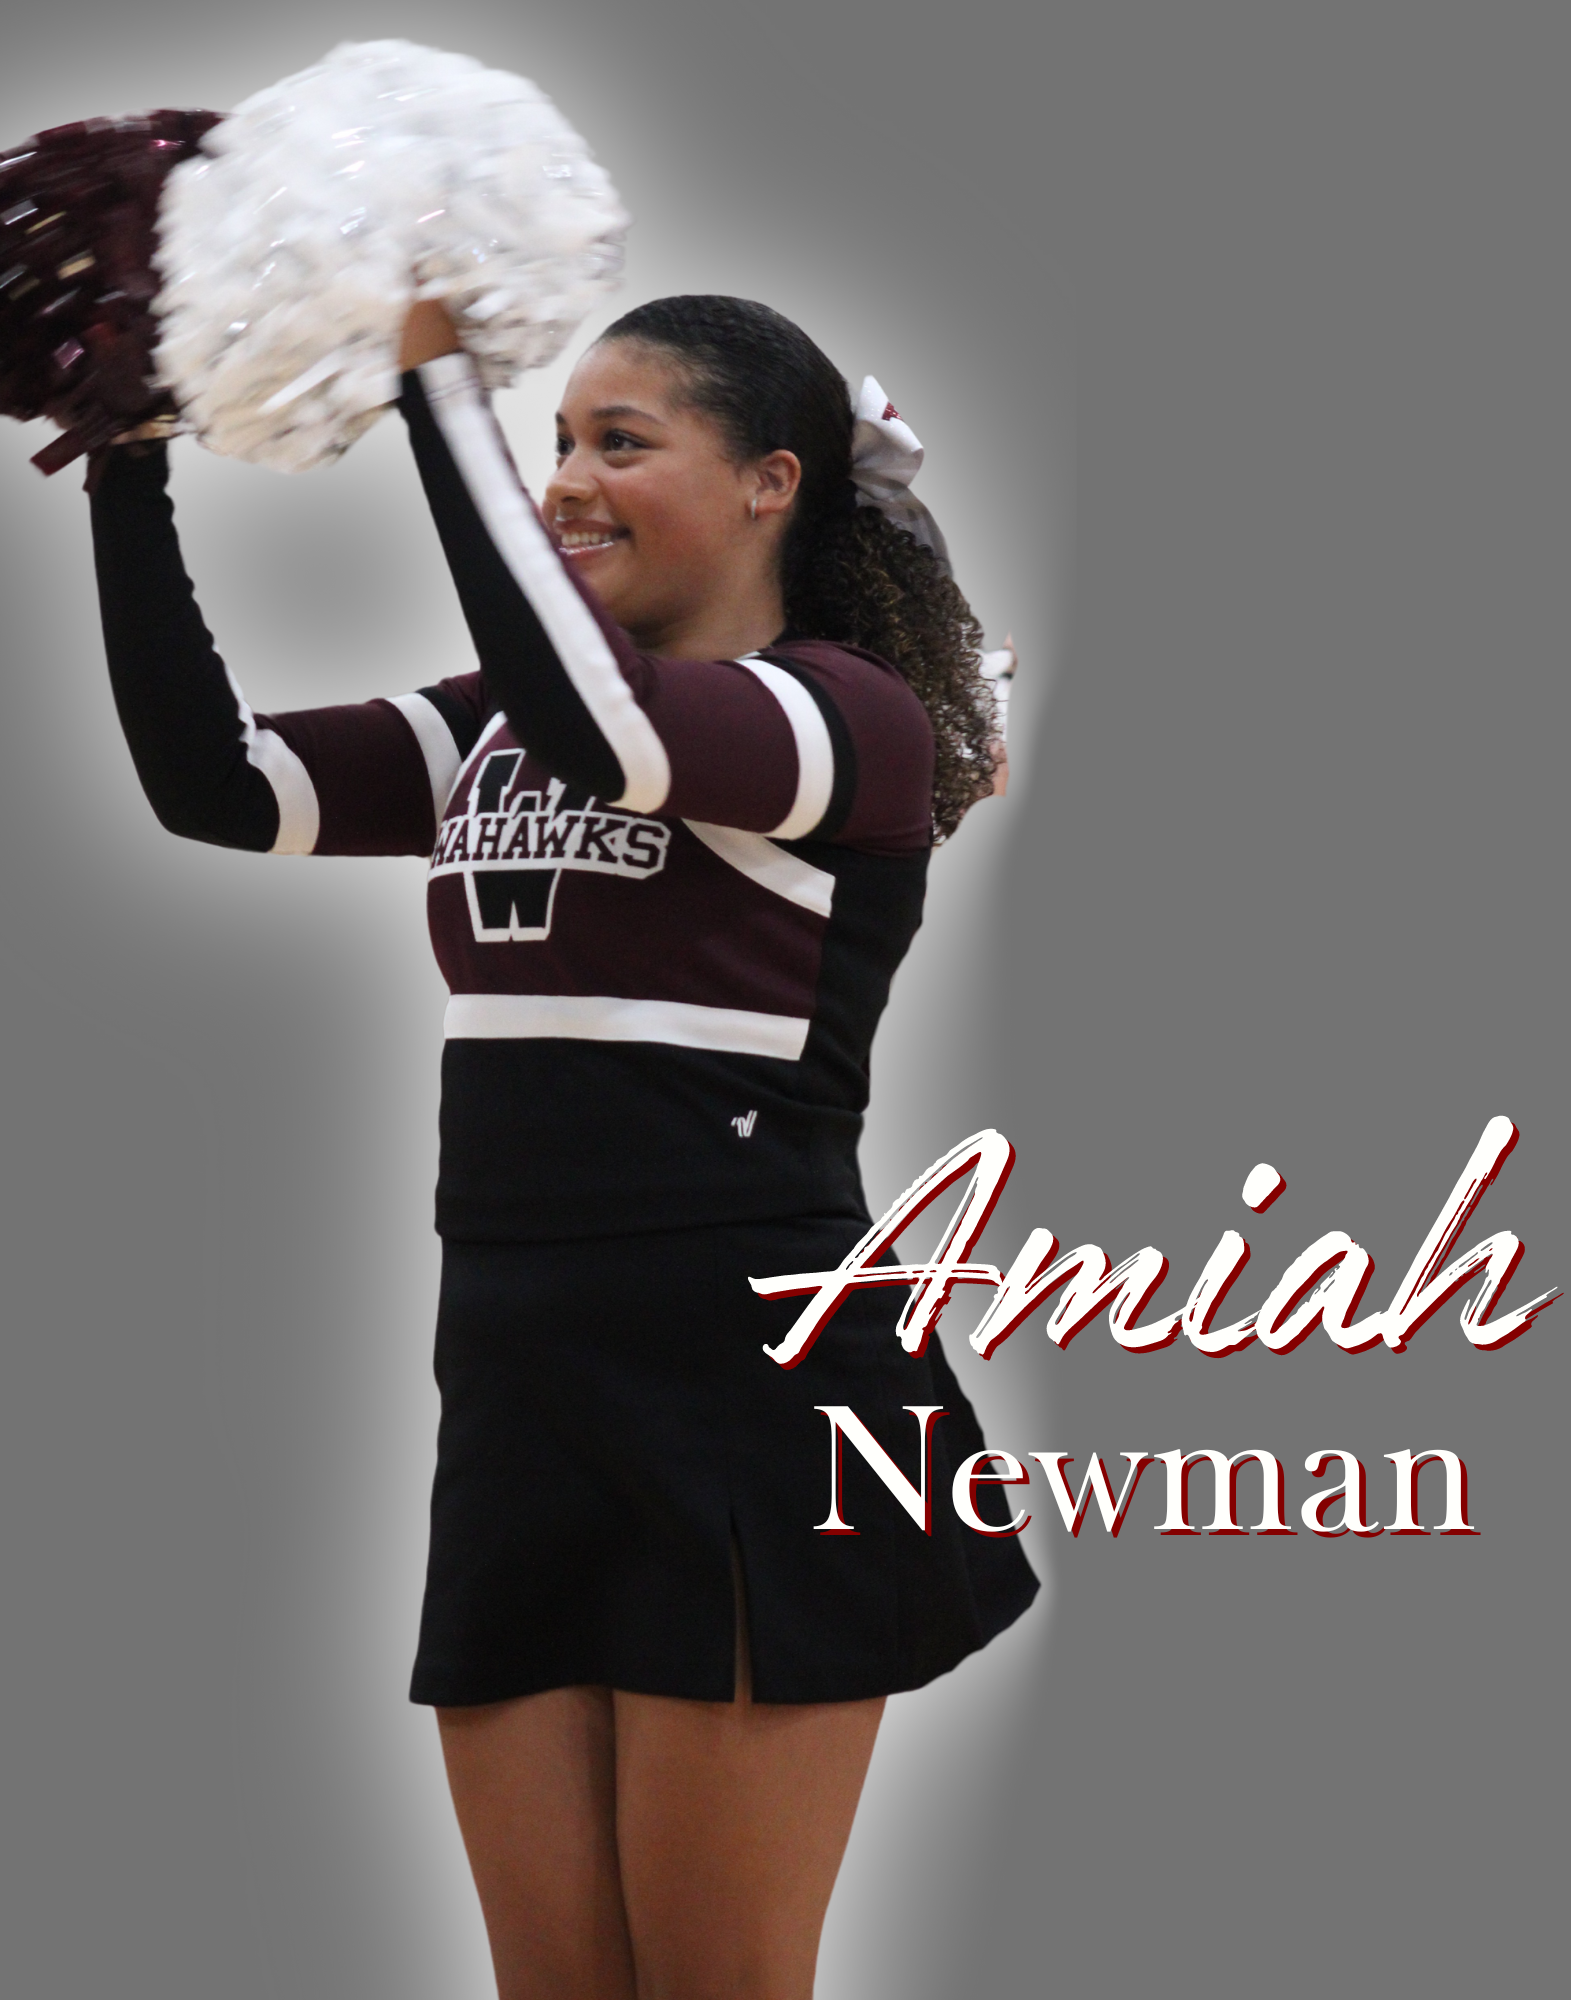 Senior Amiah Newman plans to attend Iowa State University to cheer